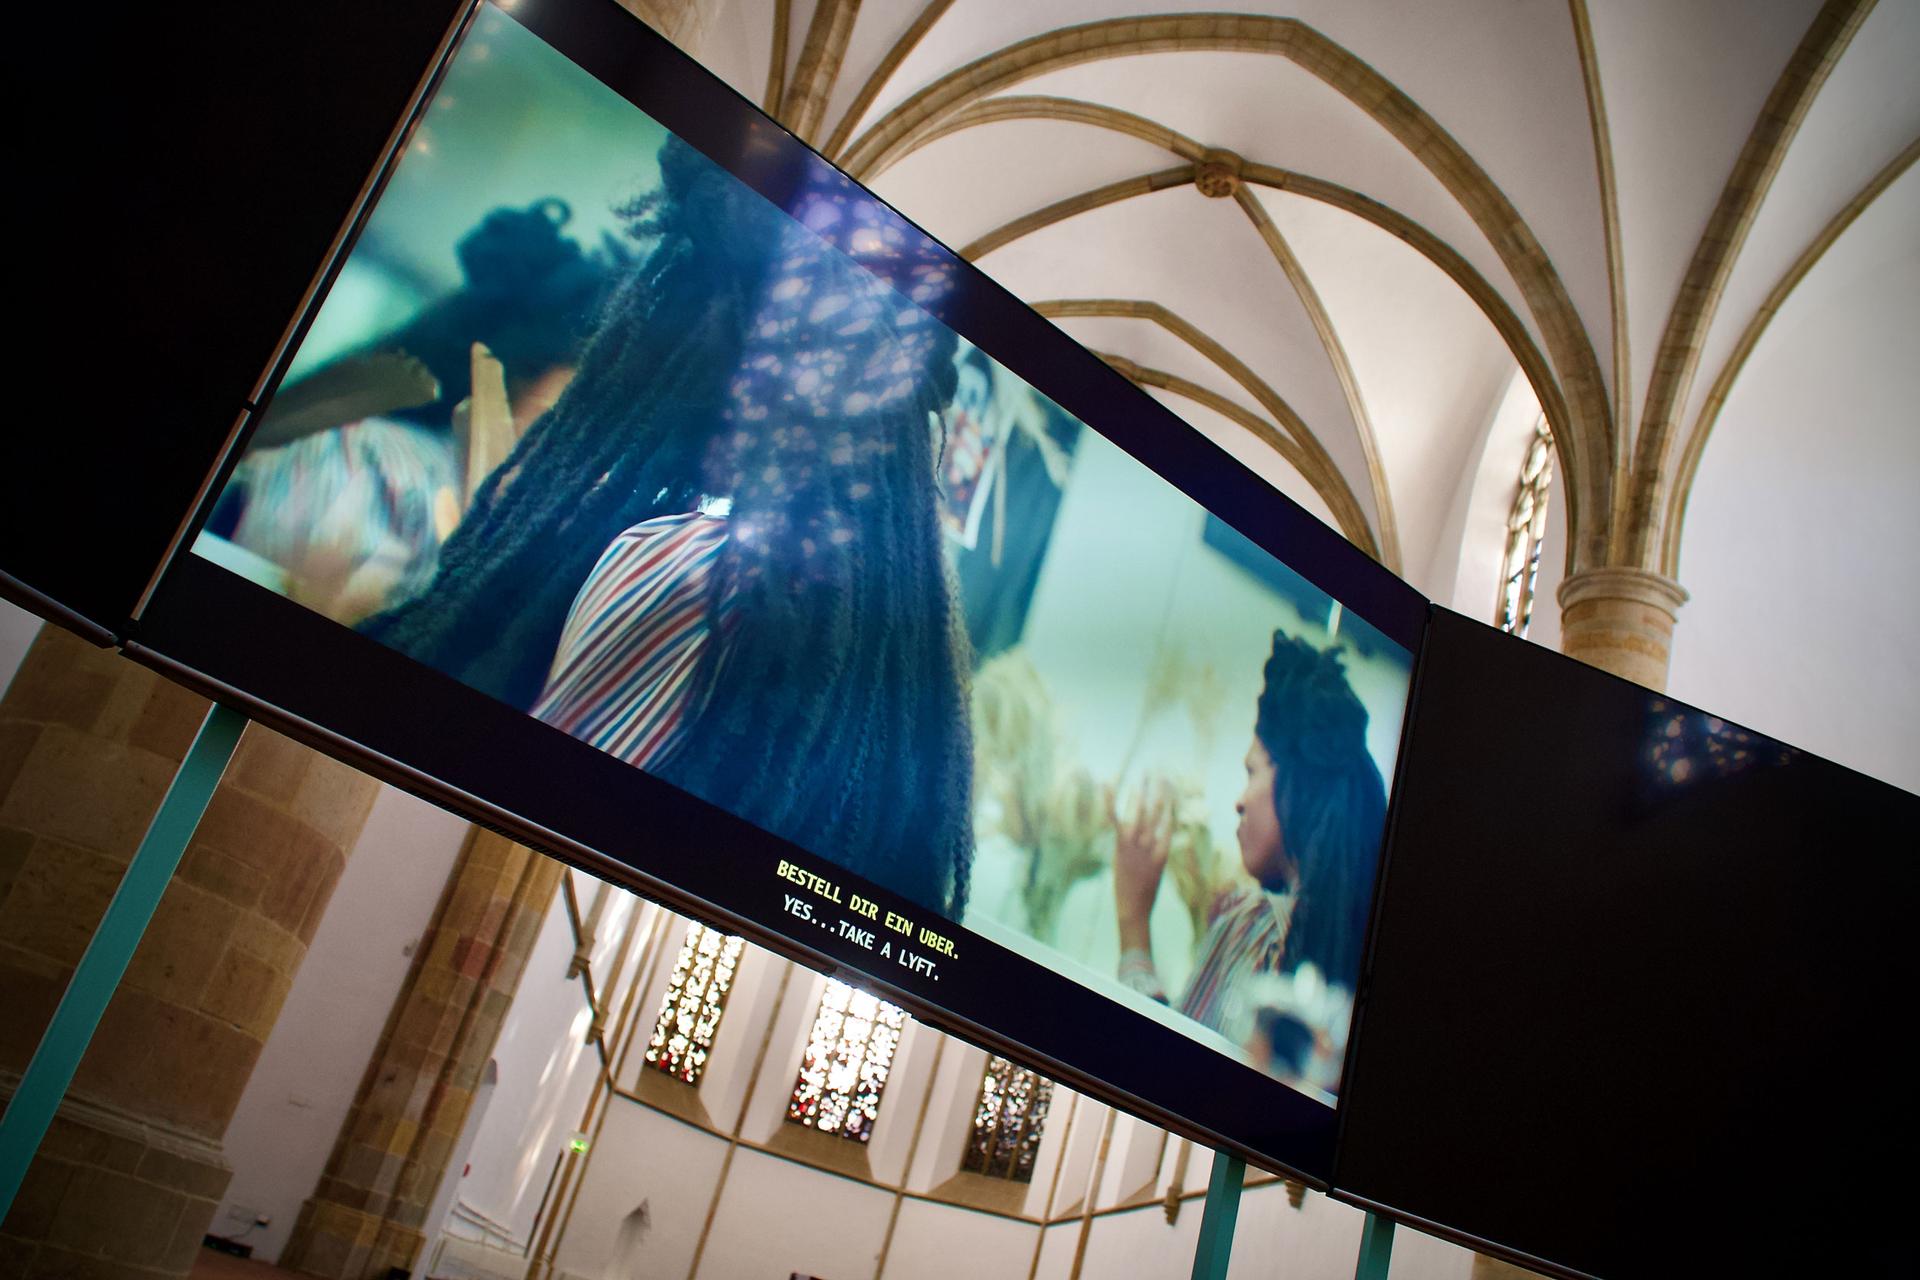 A video installation appears in the the exhibit, 